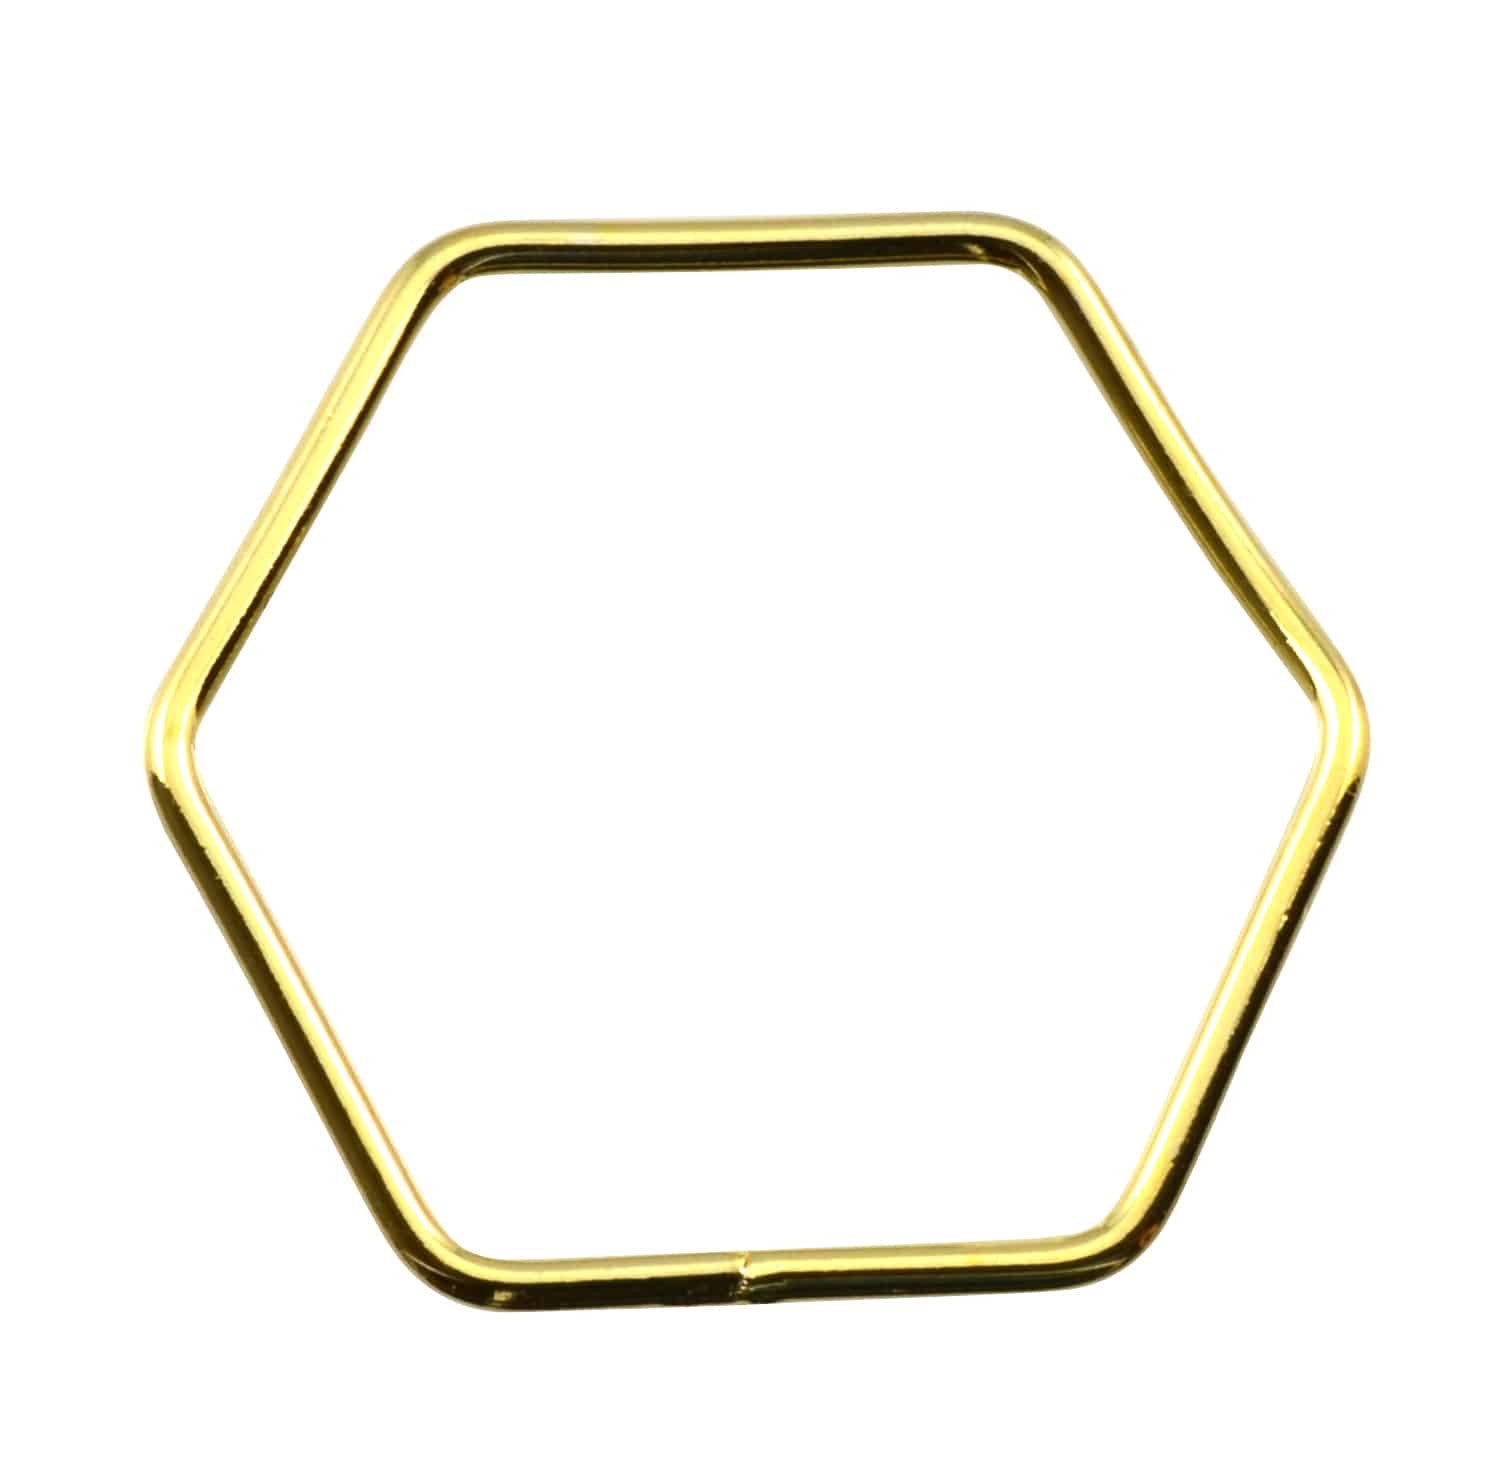 Enreverie Hexagon Ring, Gold Plated Non-Adjustable, Approx. Size 9